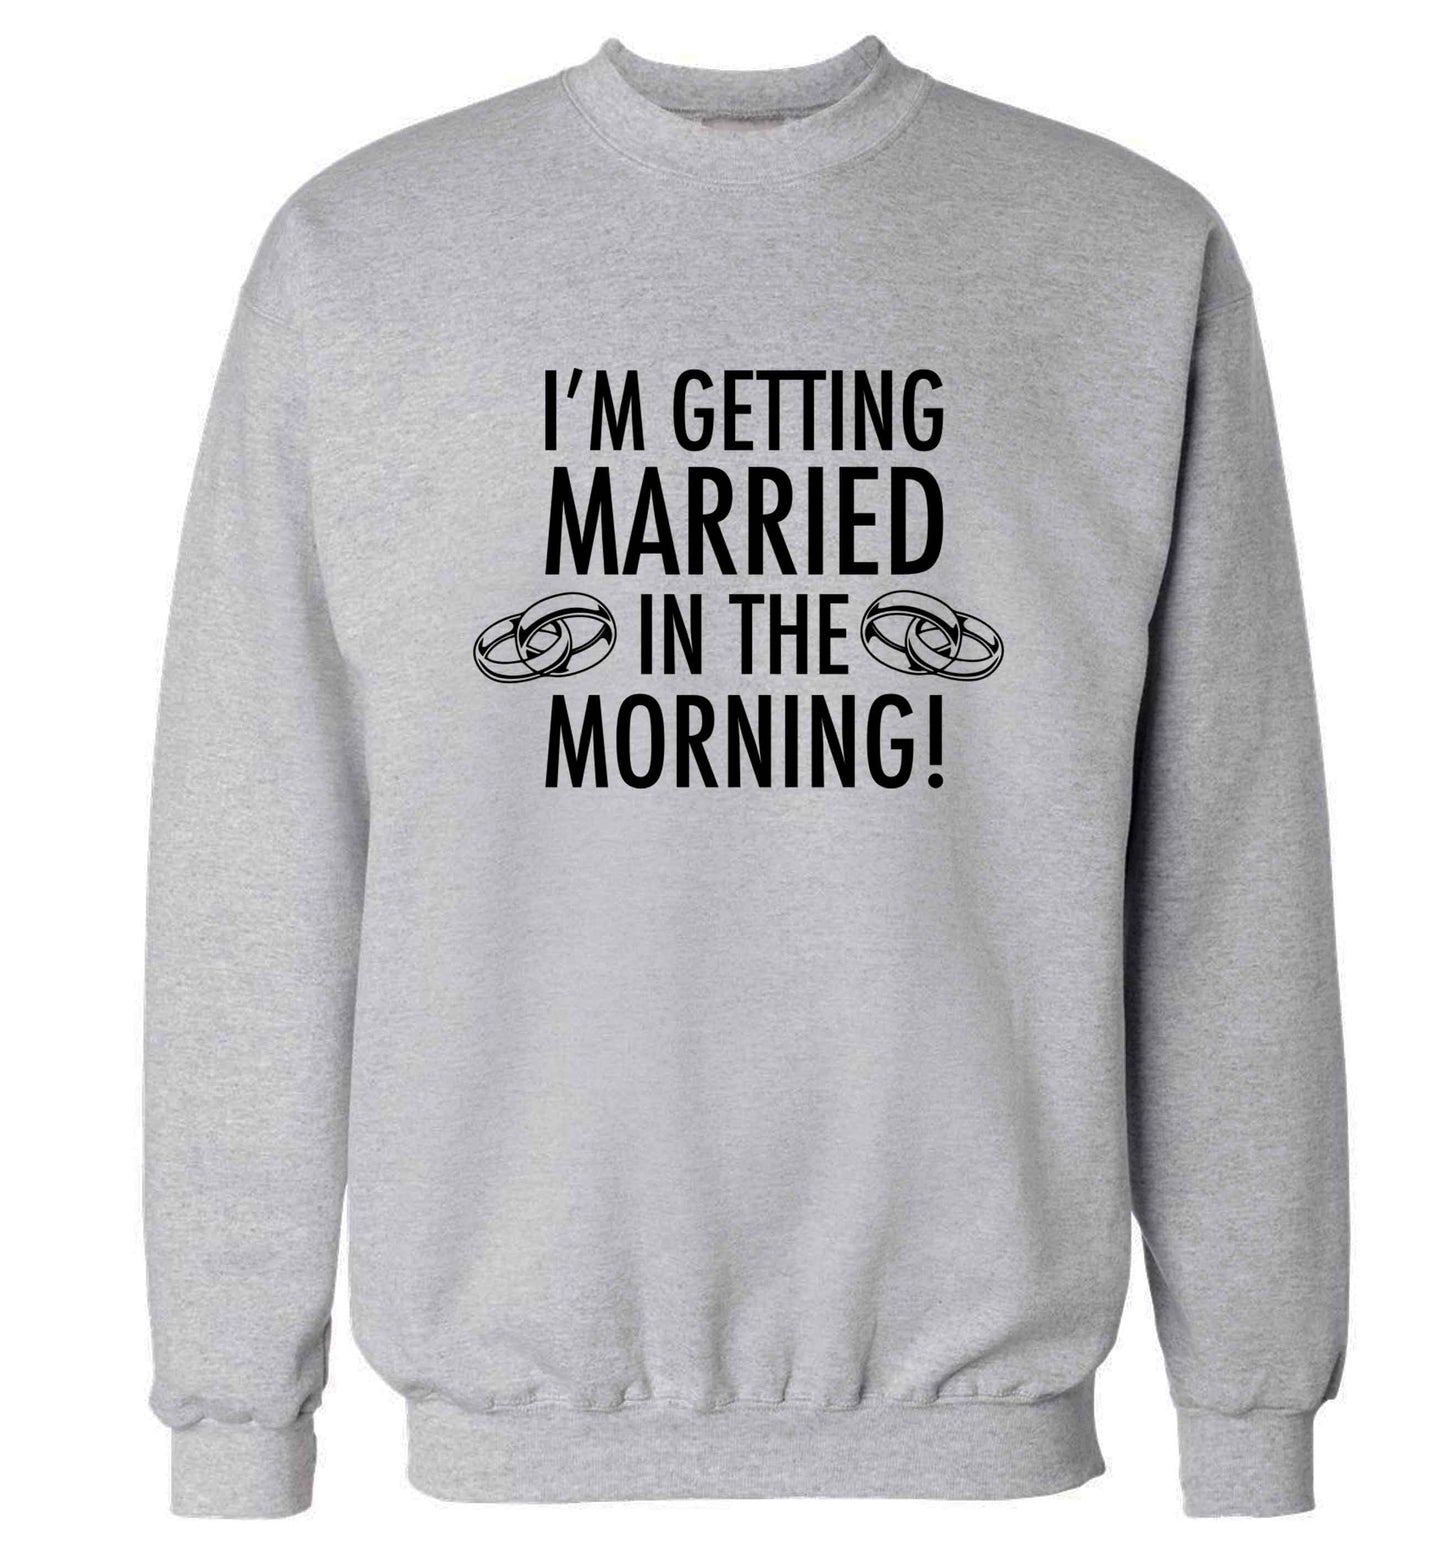 I'm getting married in the morning! adult's unisex grey sweater 2XL